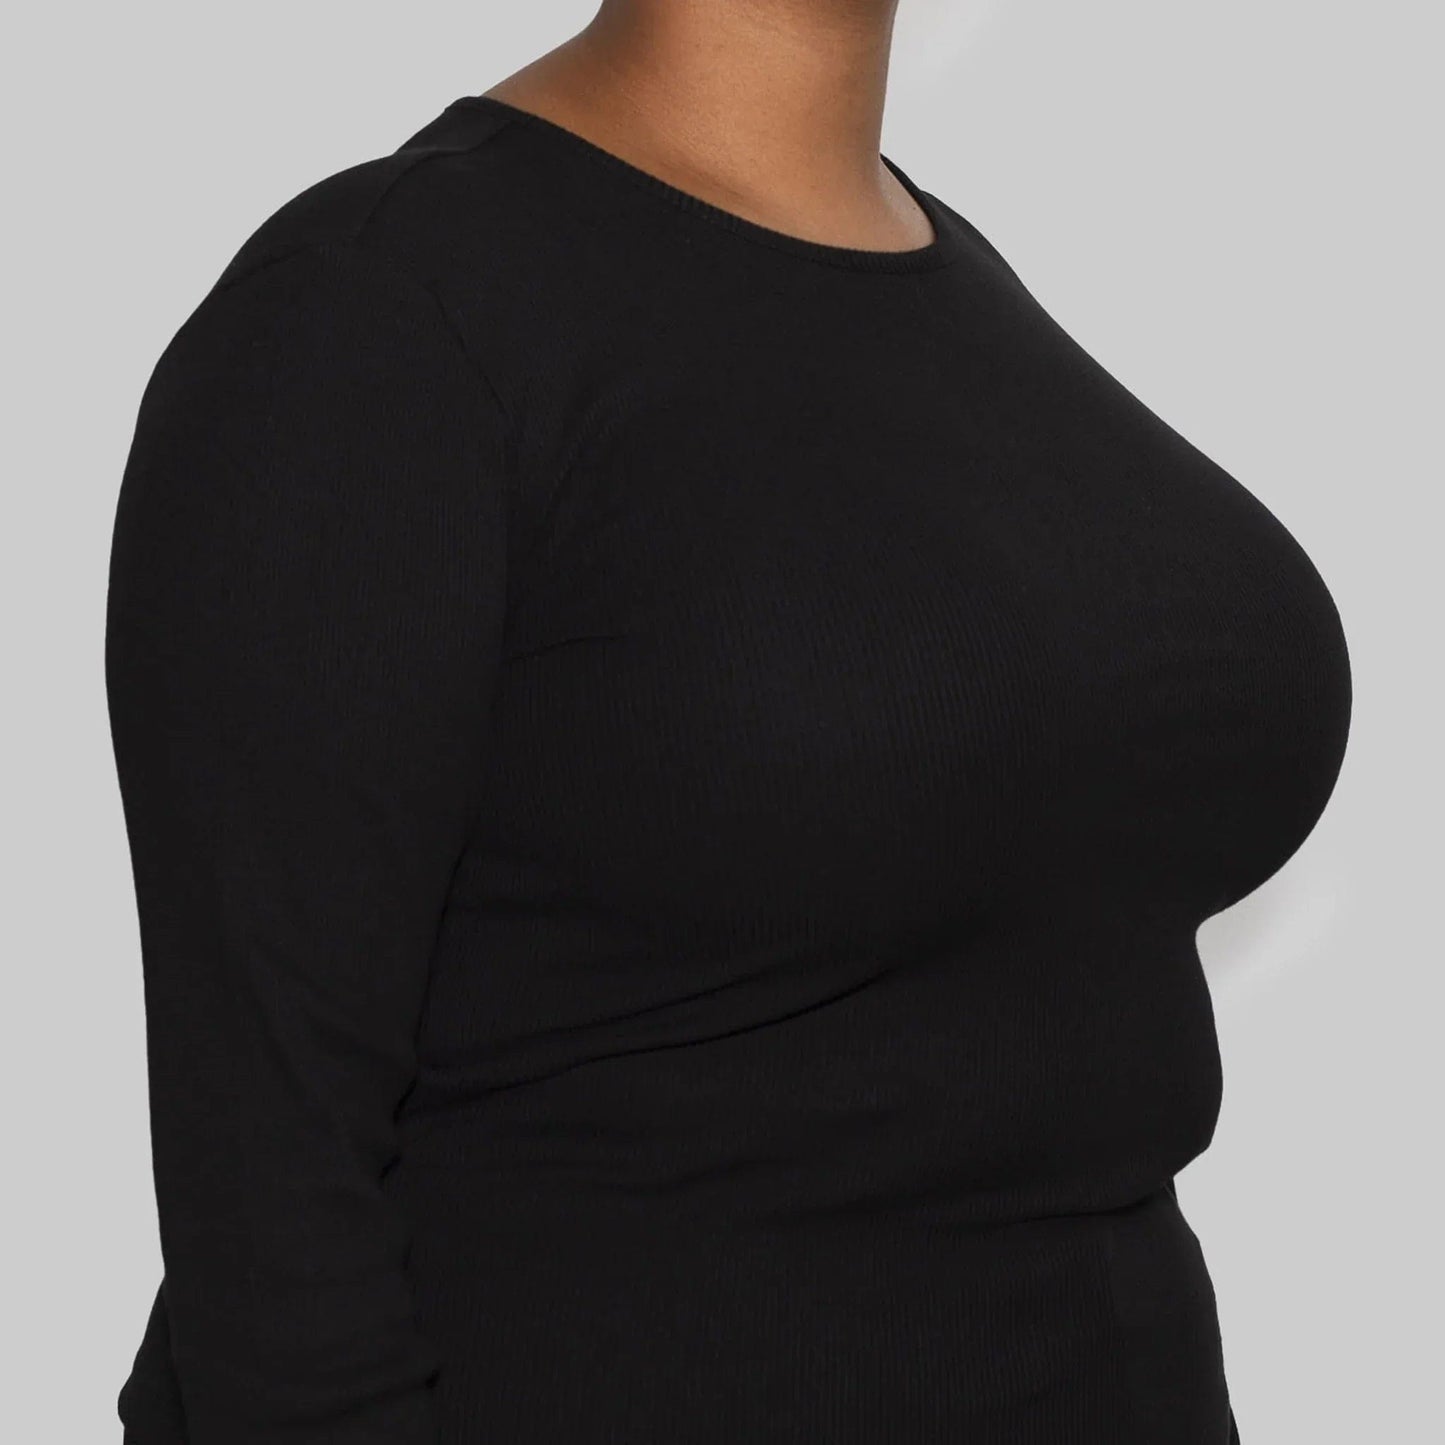 3 Pack | Women’s Rib Long Sleeve Tops, Recycled Cotton, Black